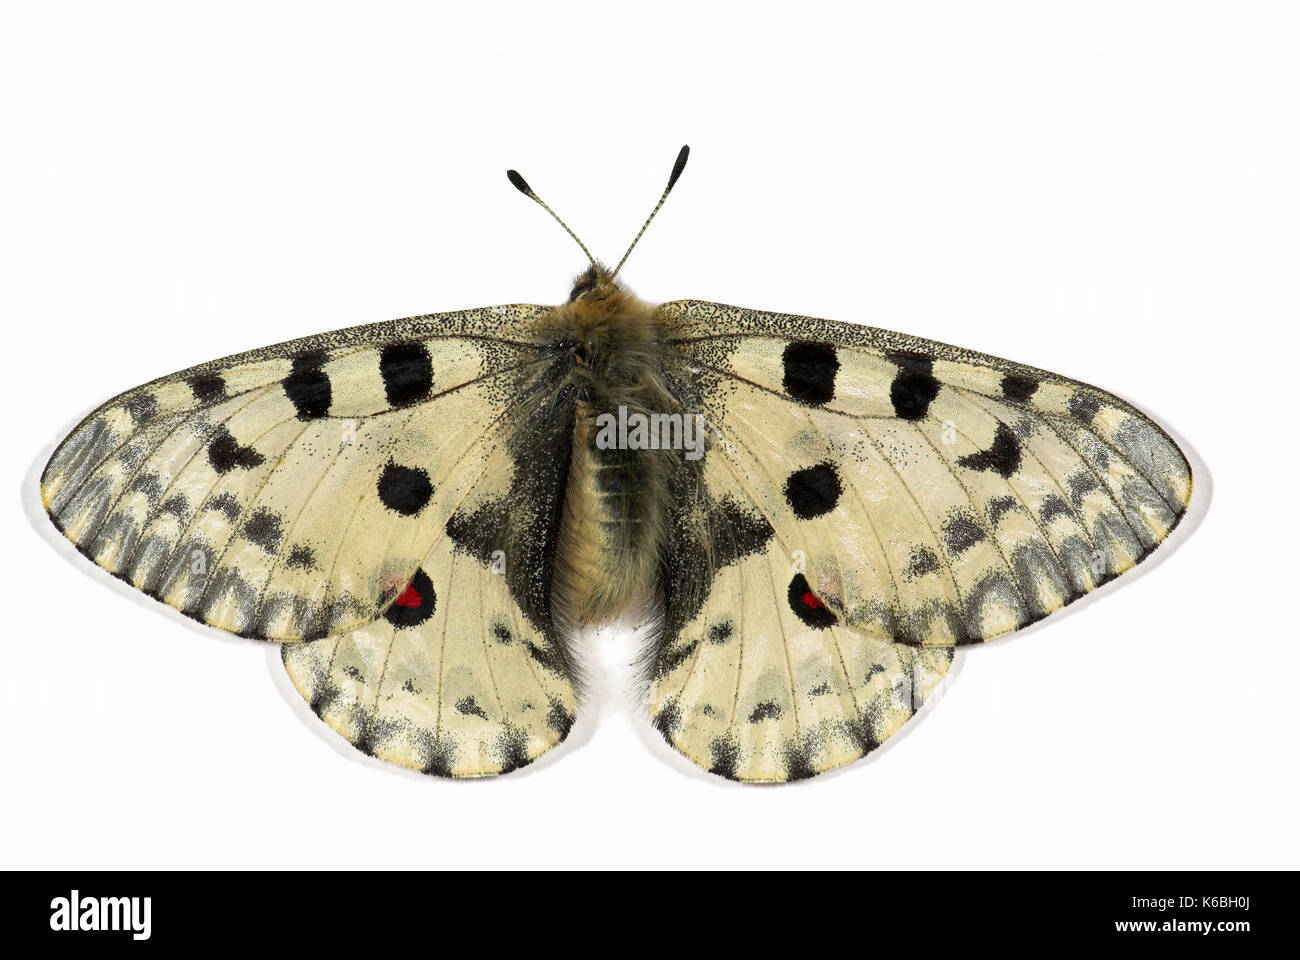 Apollo Butterfly, Parnassius apollo, Classified as Vulnerable (VU - A1cde) on the IUCN Red List 2002, and listed on Appendix II of CITES, set specimen Stock Photo